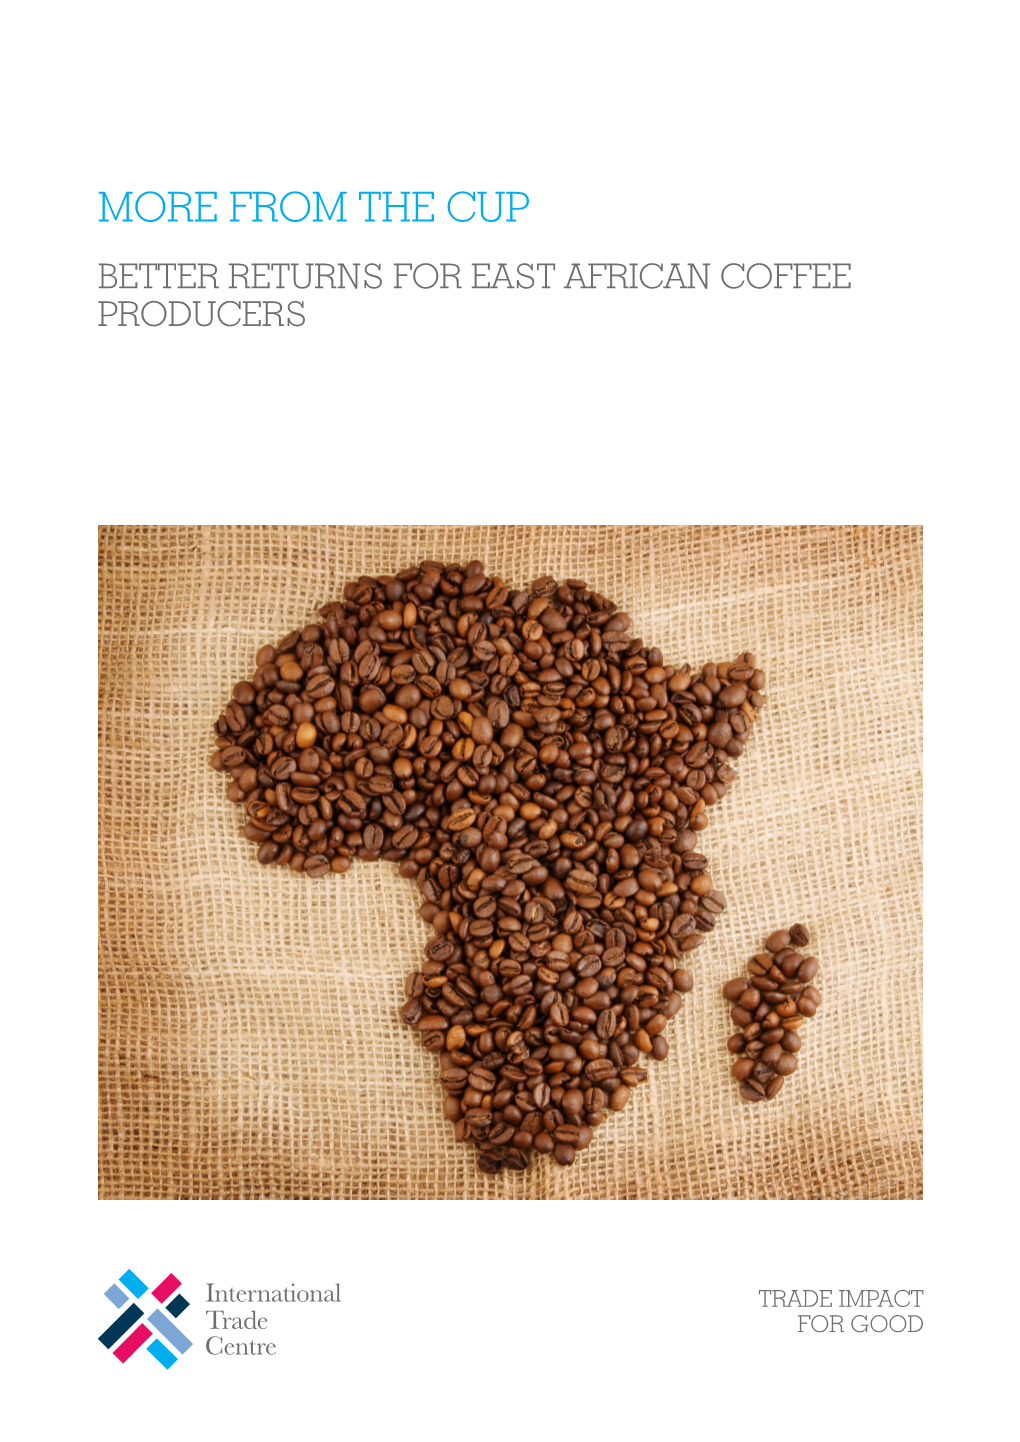 More from the Cup: Better Returns for East African Coffee Producers